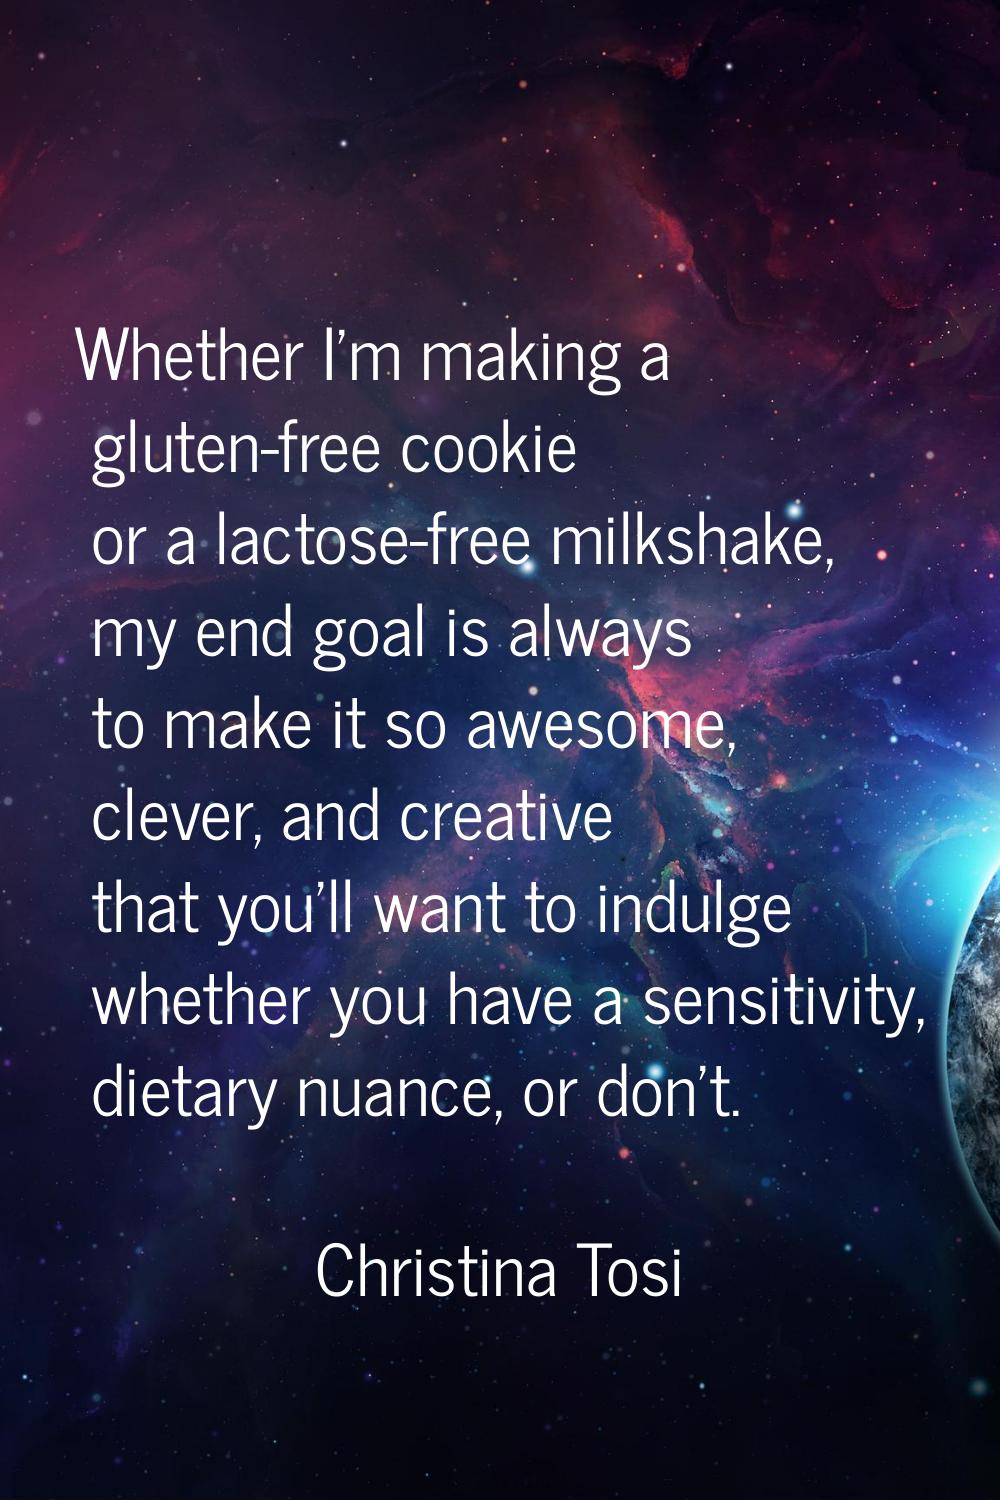 Whether I'm making a gluten-free cookie or a lactose-free milkshake, my end goal is always to make 